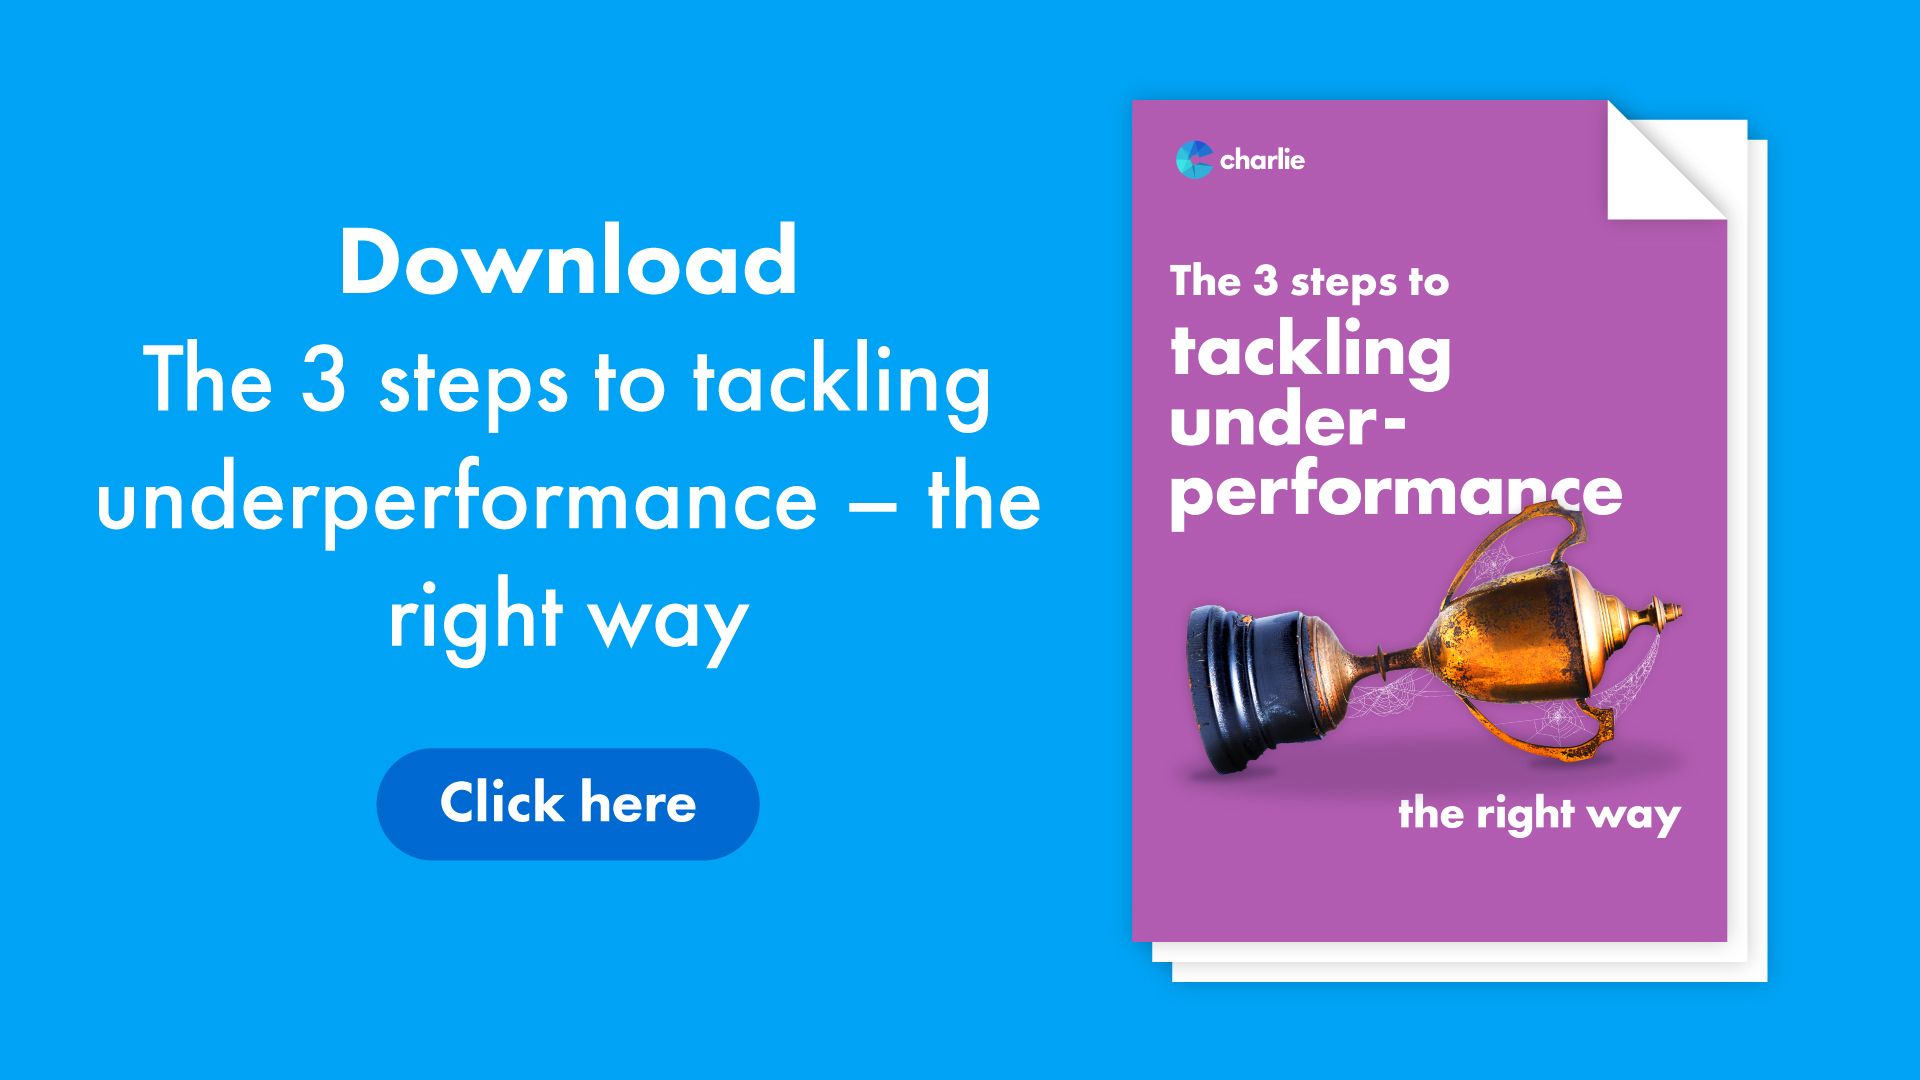 Click here to download the guide to thre three steps to tackle underperformance